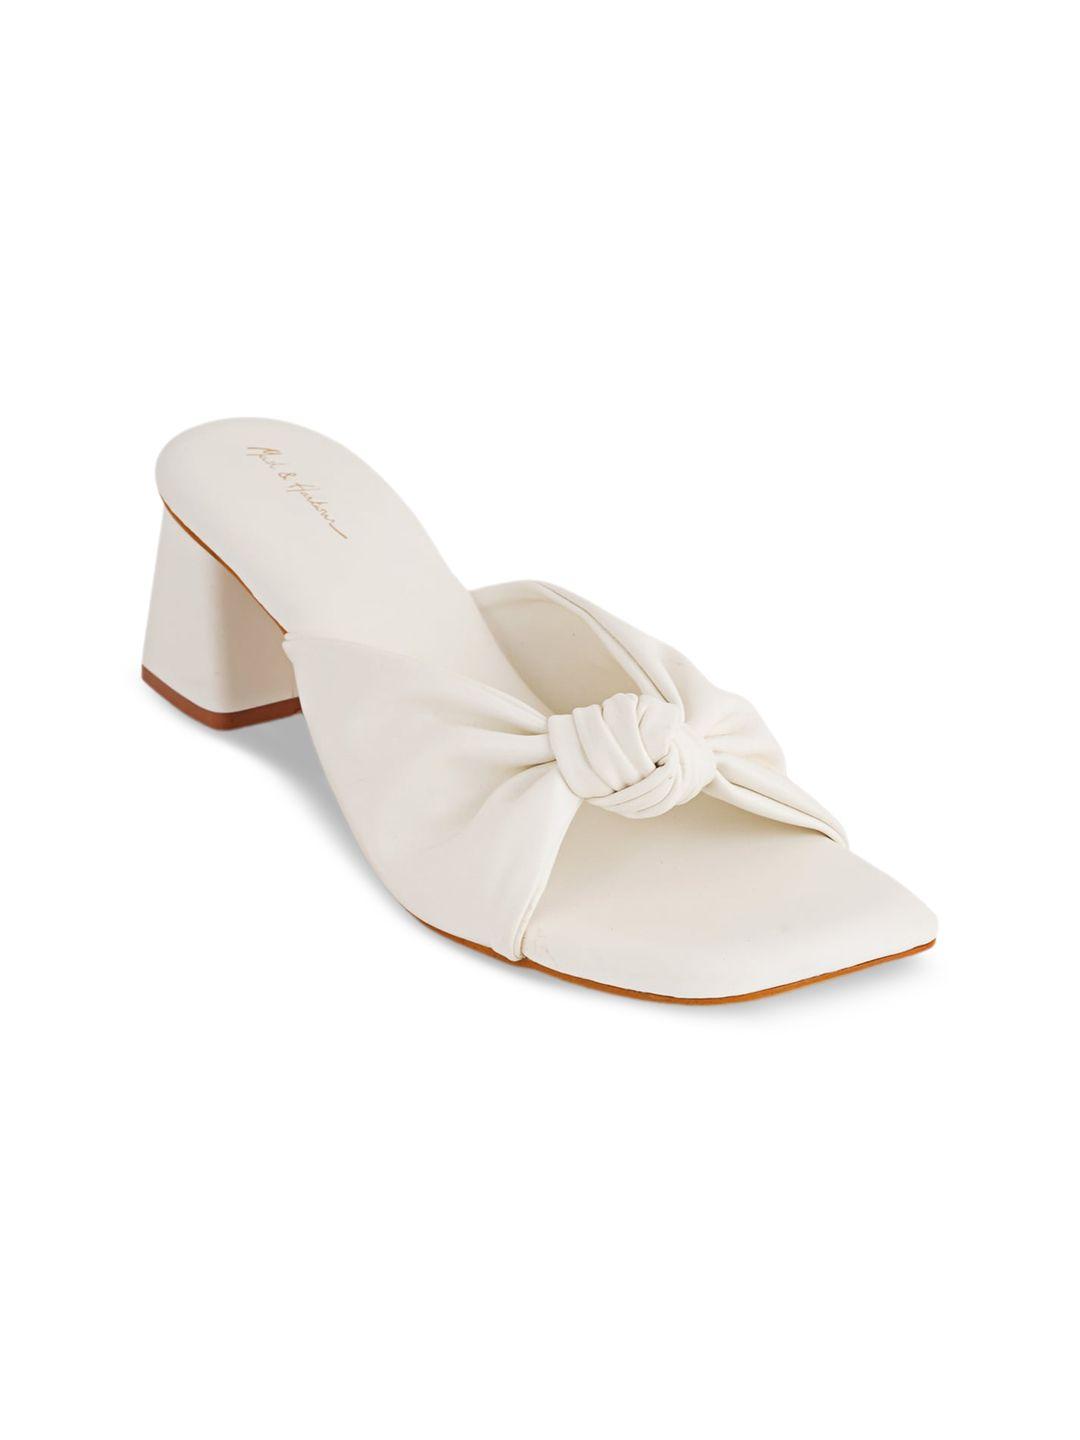 mast-&-harbour-white-block-sandals-with-bows